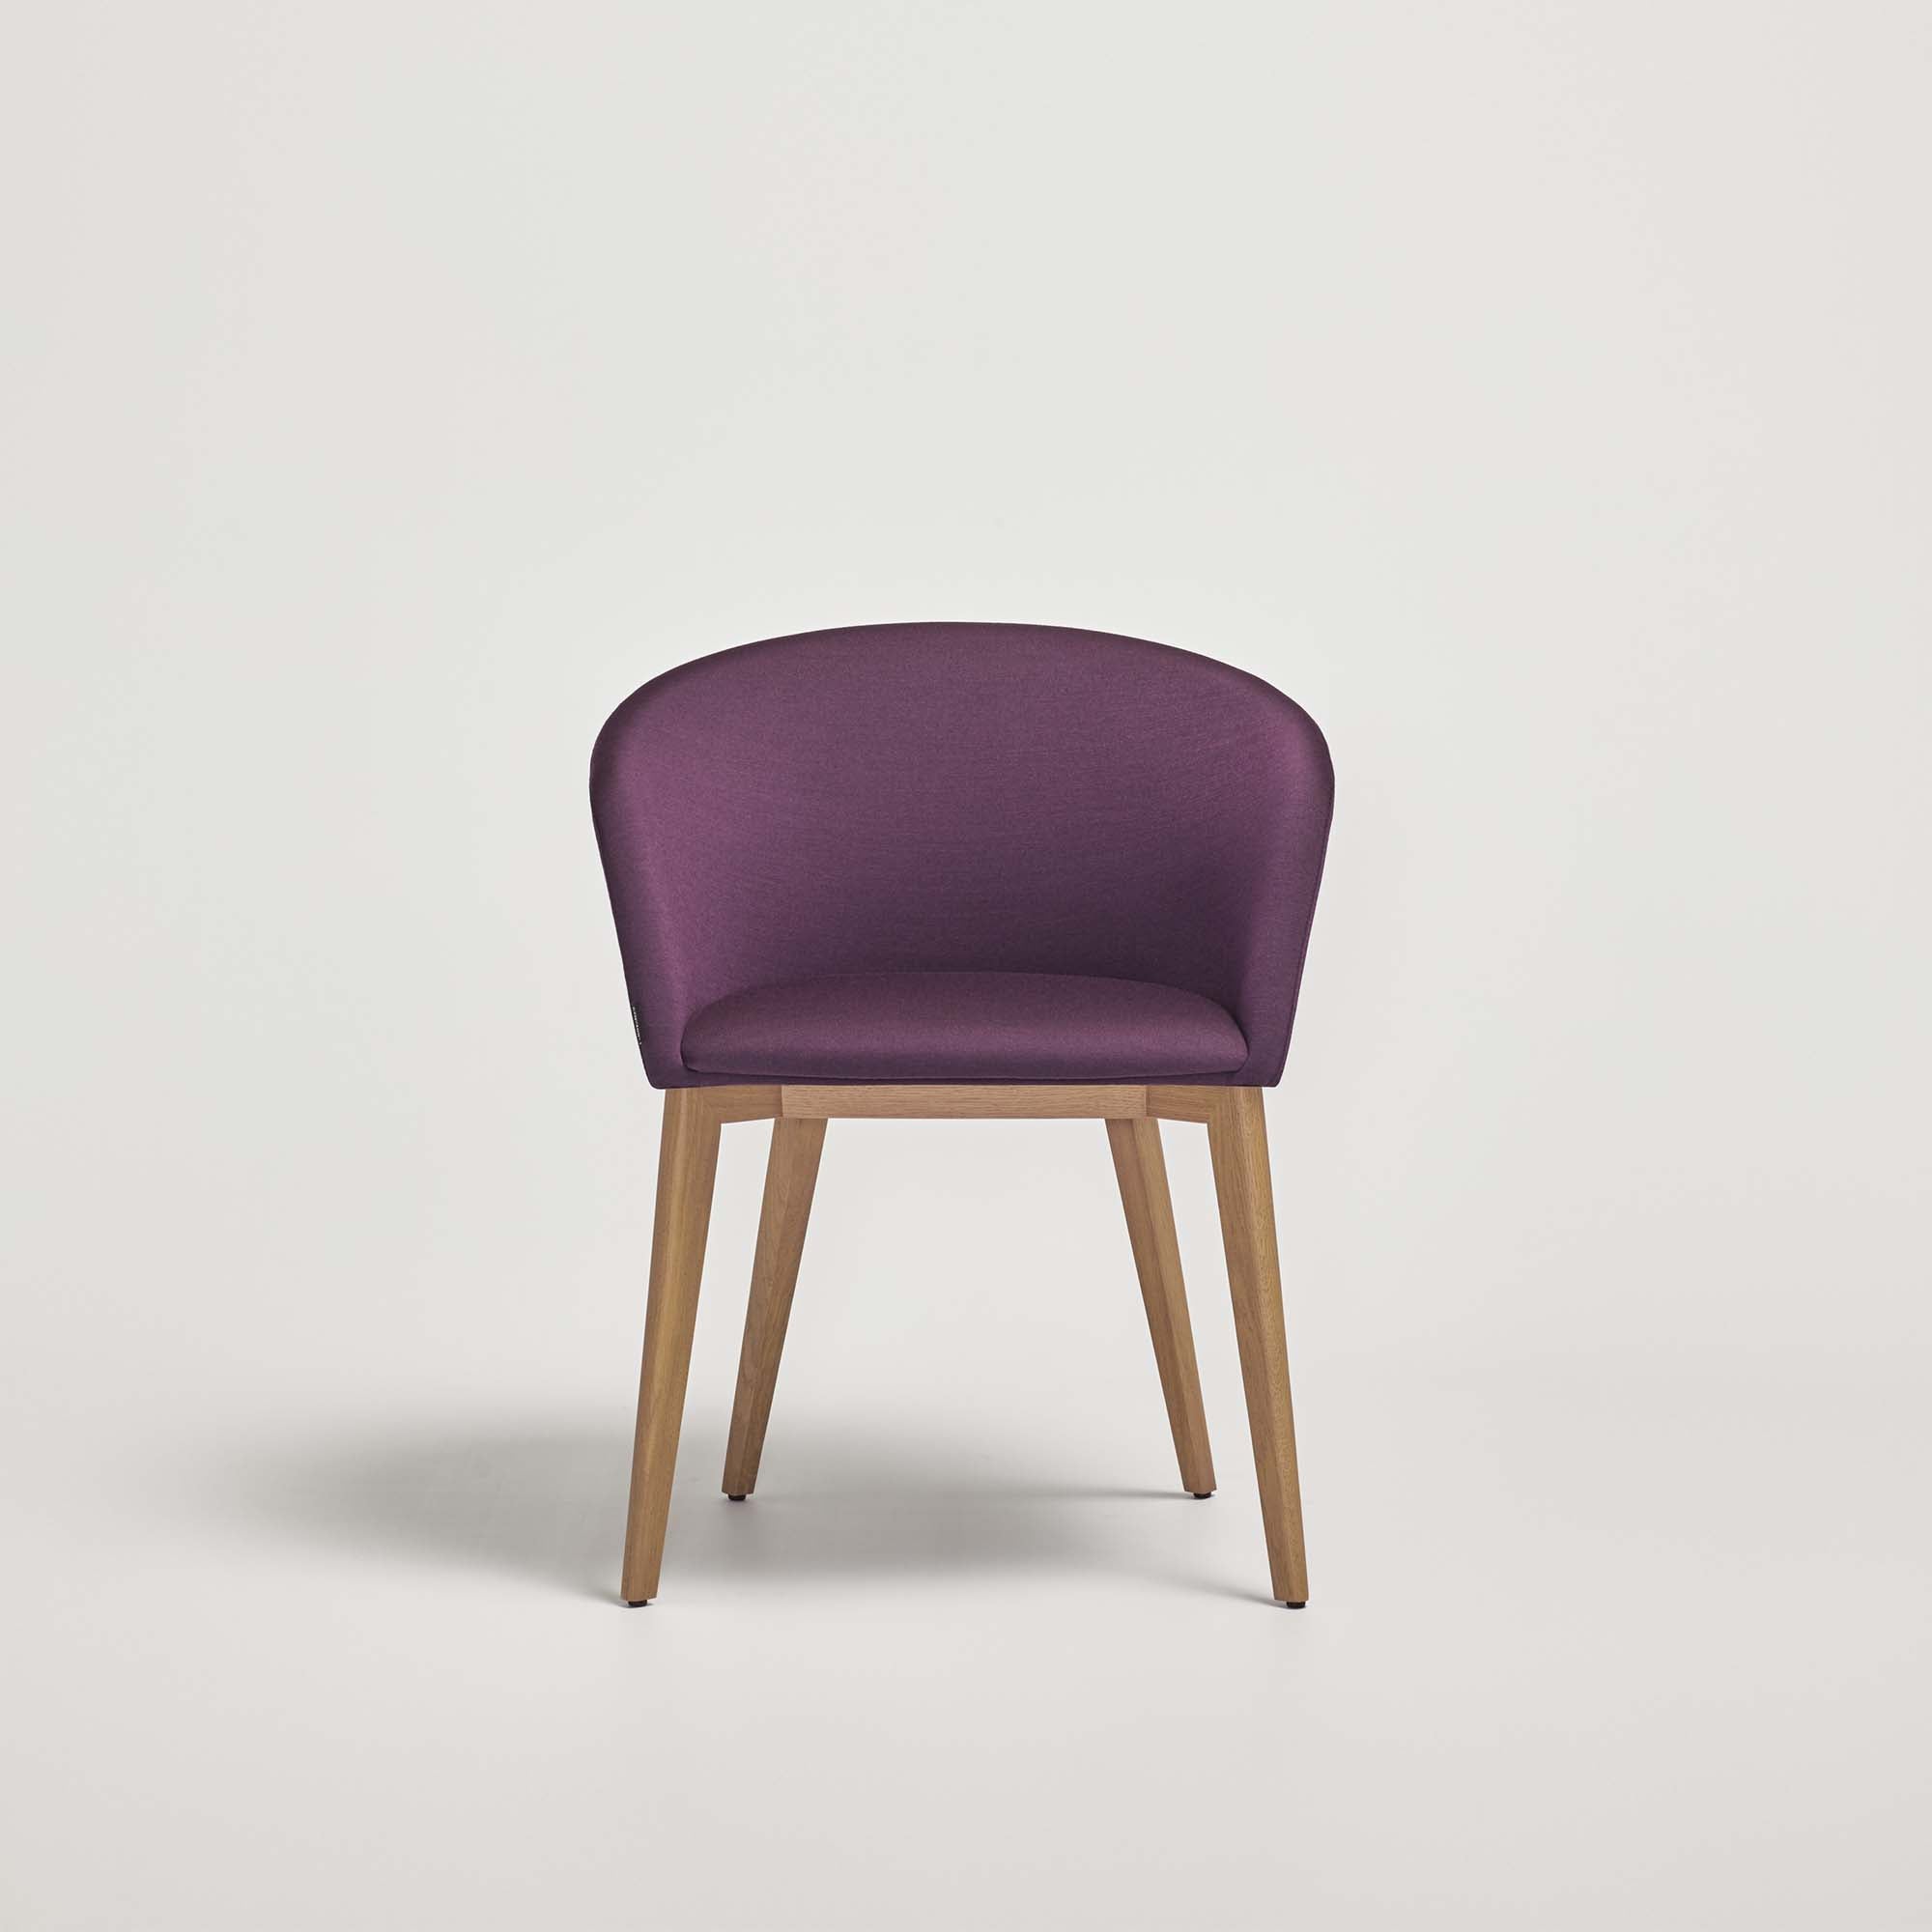 MOON Chair oak wood chair, dark natural colour, purple fabric upholstery, front view